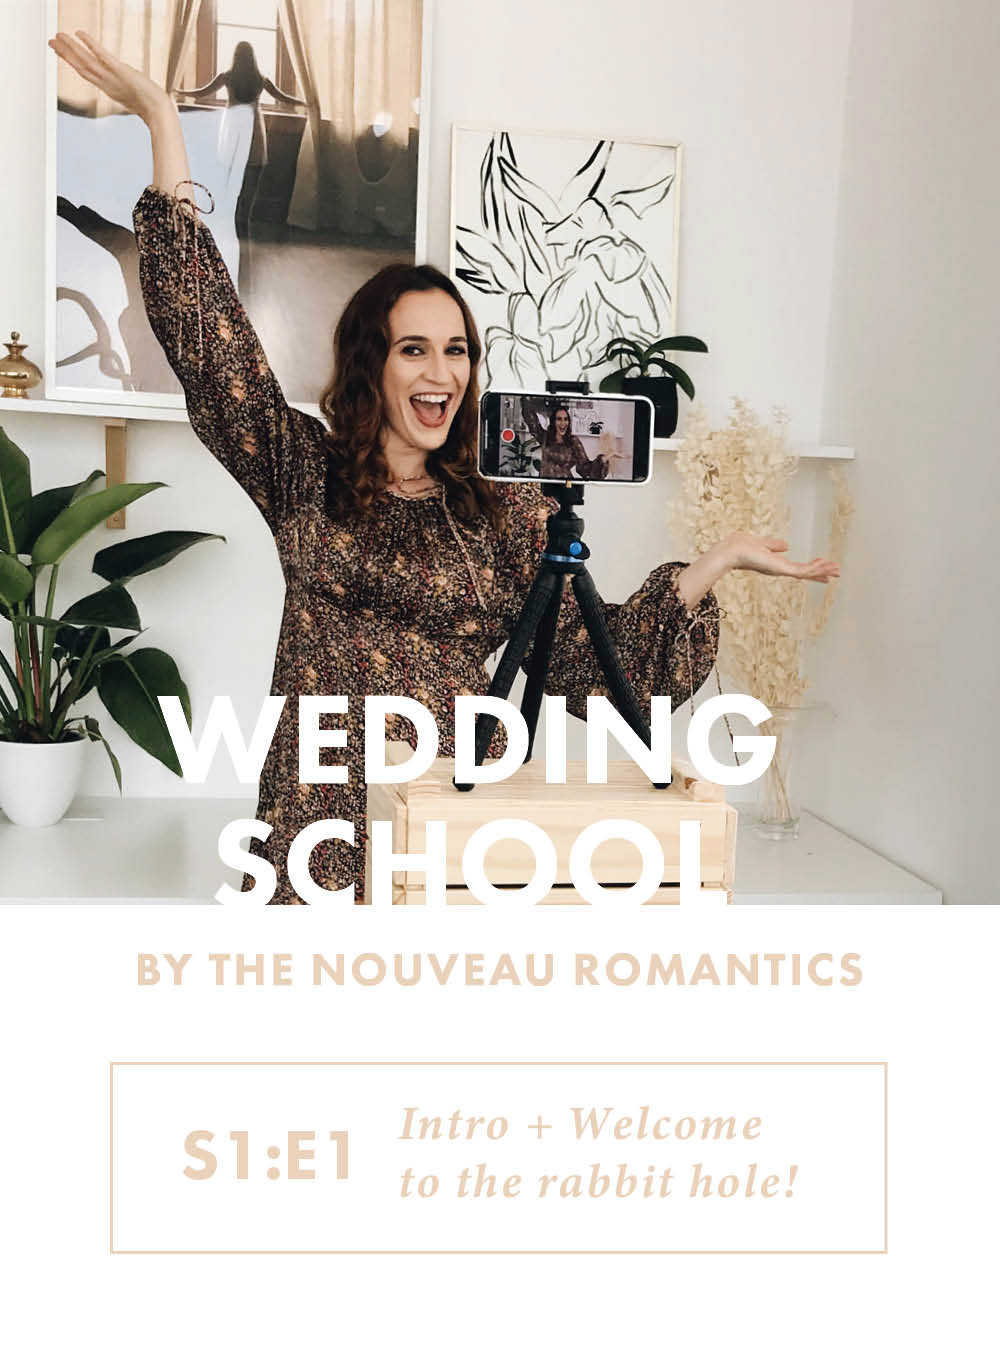 Wedding School by TNR: Wedding Planning Videos for Engaged Couples. Free resource for couples looking for expert advice while planning their wedding.